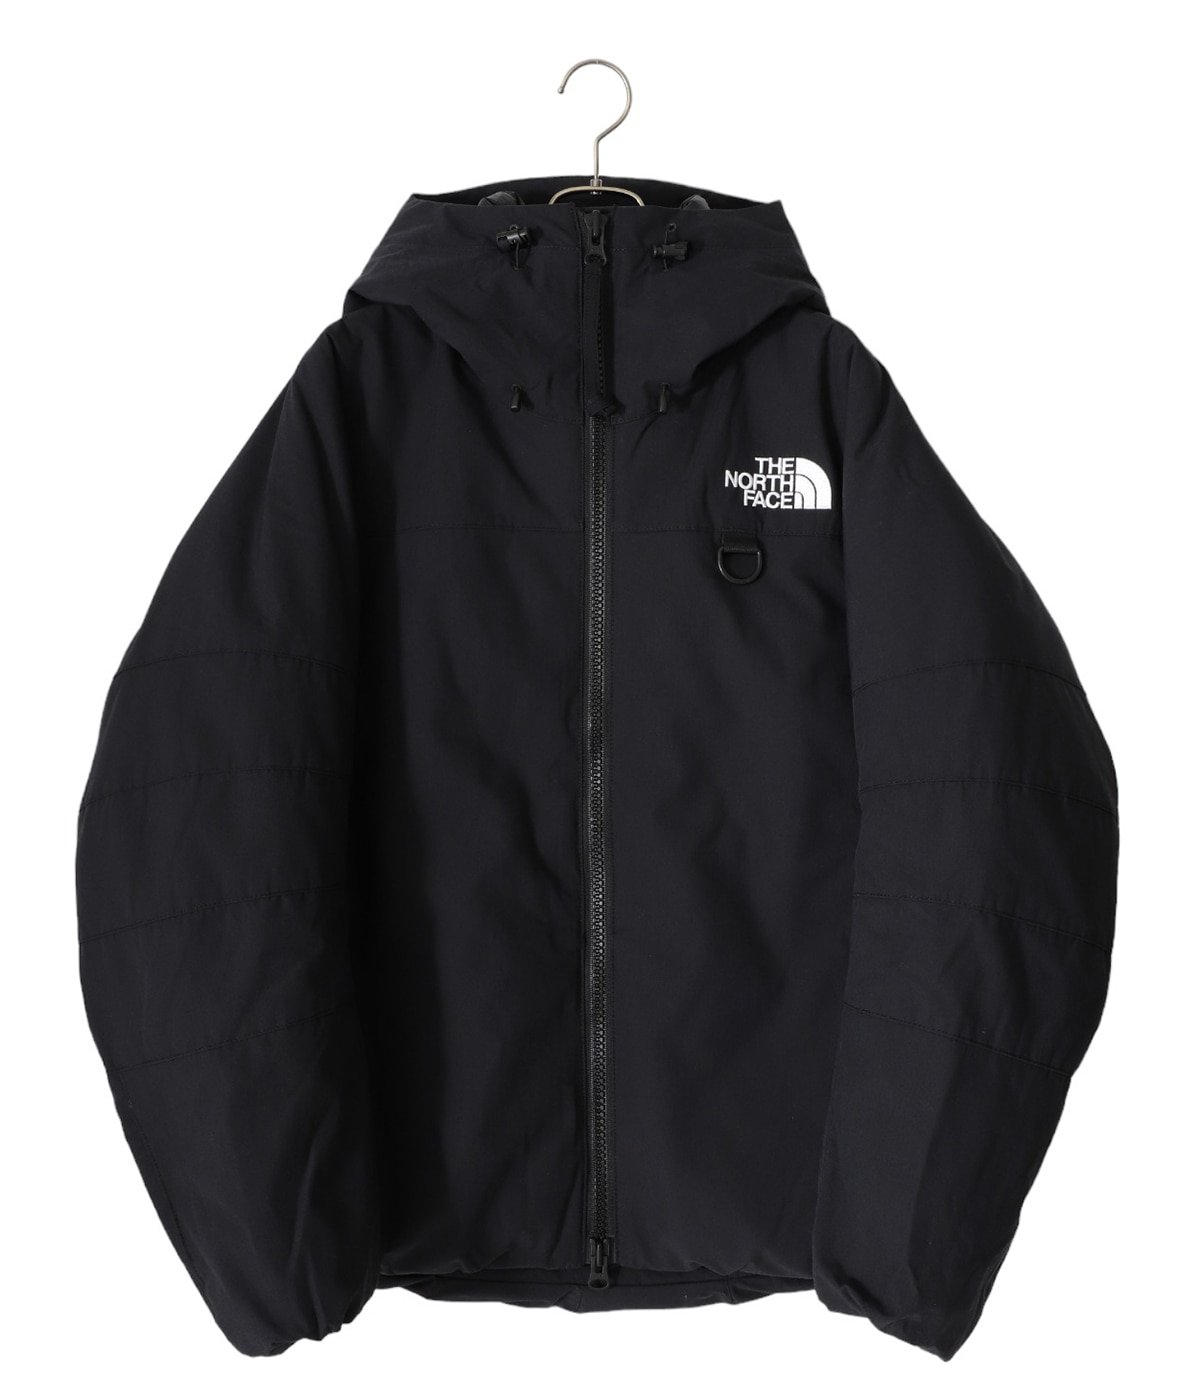 THE NORTH FACE / Firefly Insulated Parka